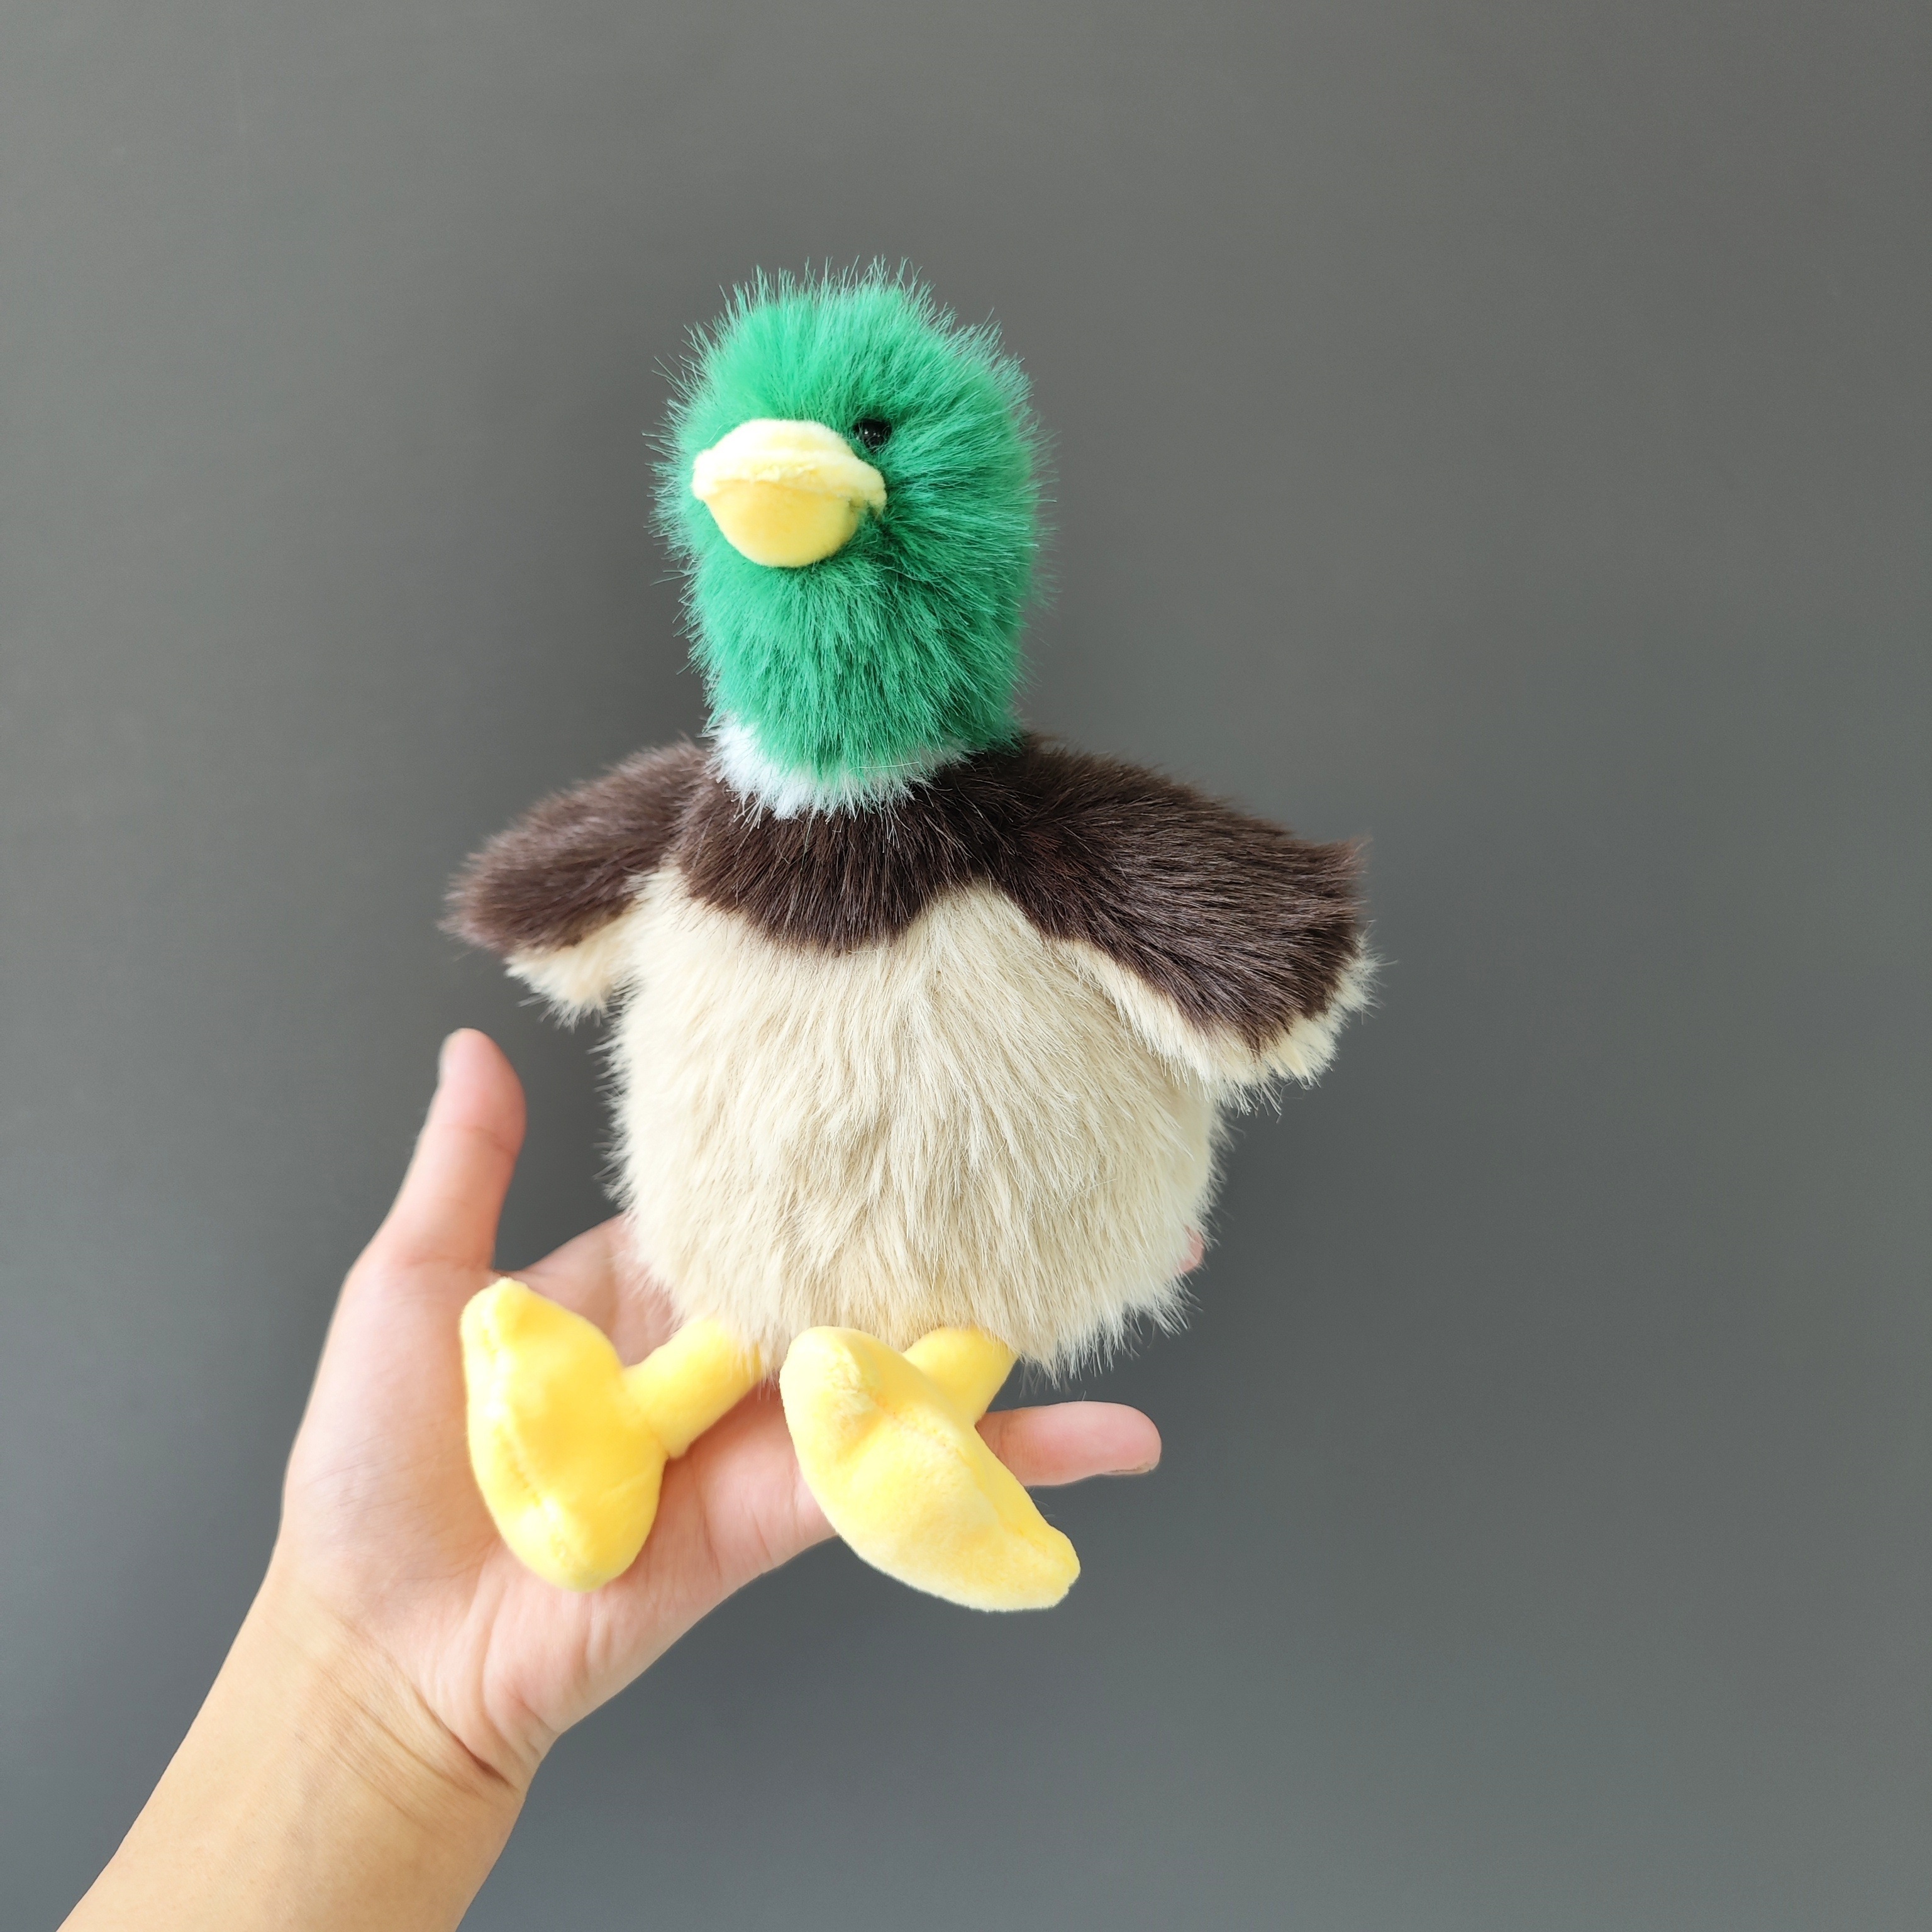 

1pc Cute Stuffed Animal - Soft Synthetic Fiber Plush Duckling Toy For 0-3 Years - Adorable Green-headed Platyrhynchos Plushie, Ideal Gift For Baby Shower, Christmas, Halloween Decor